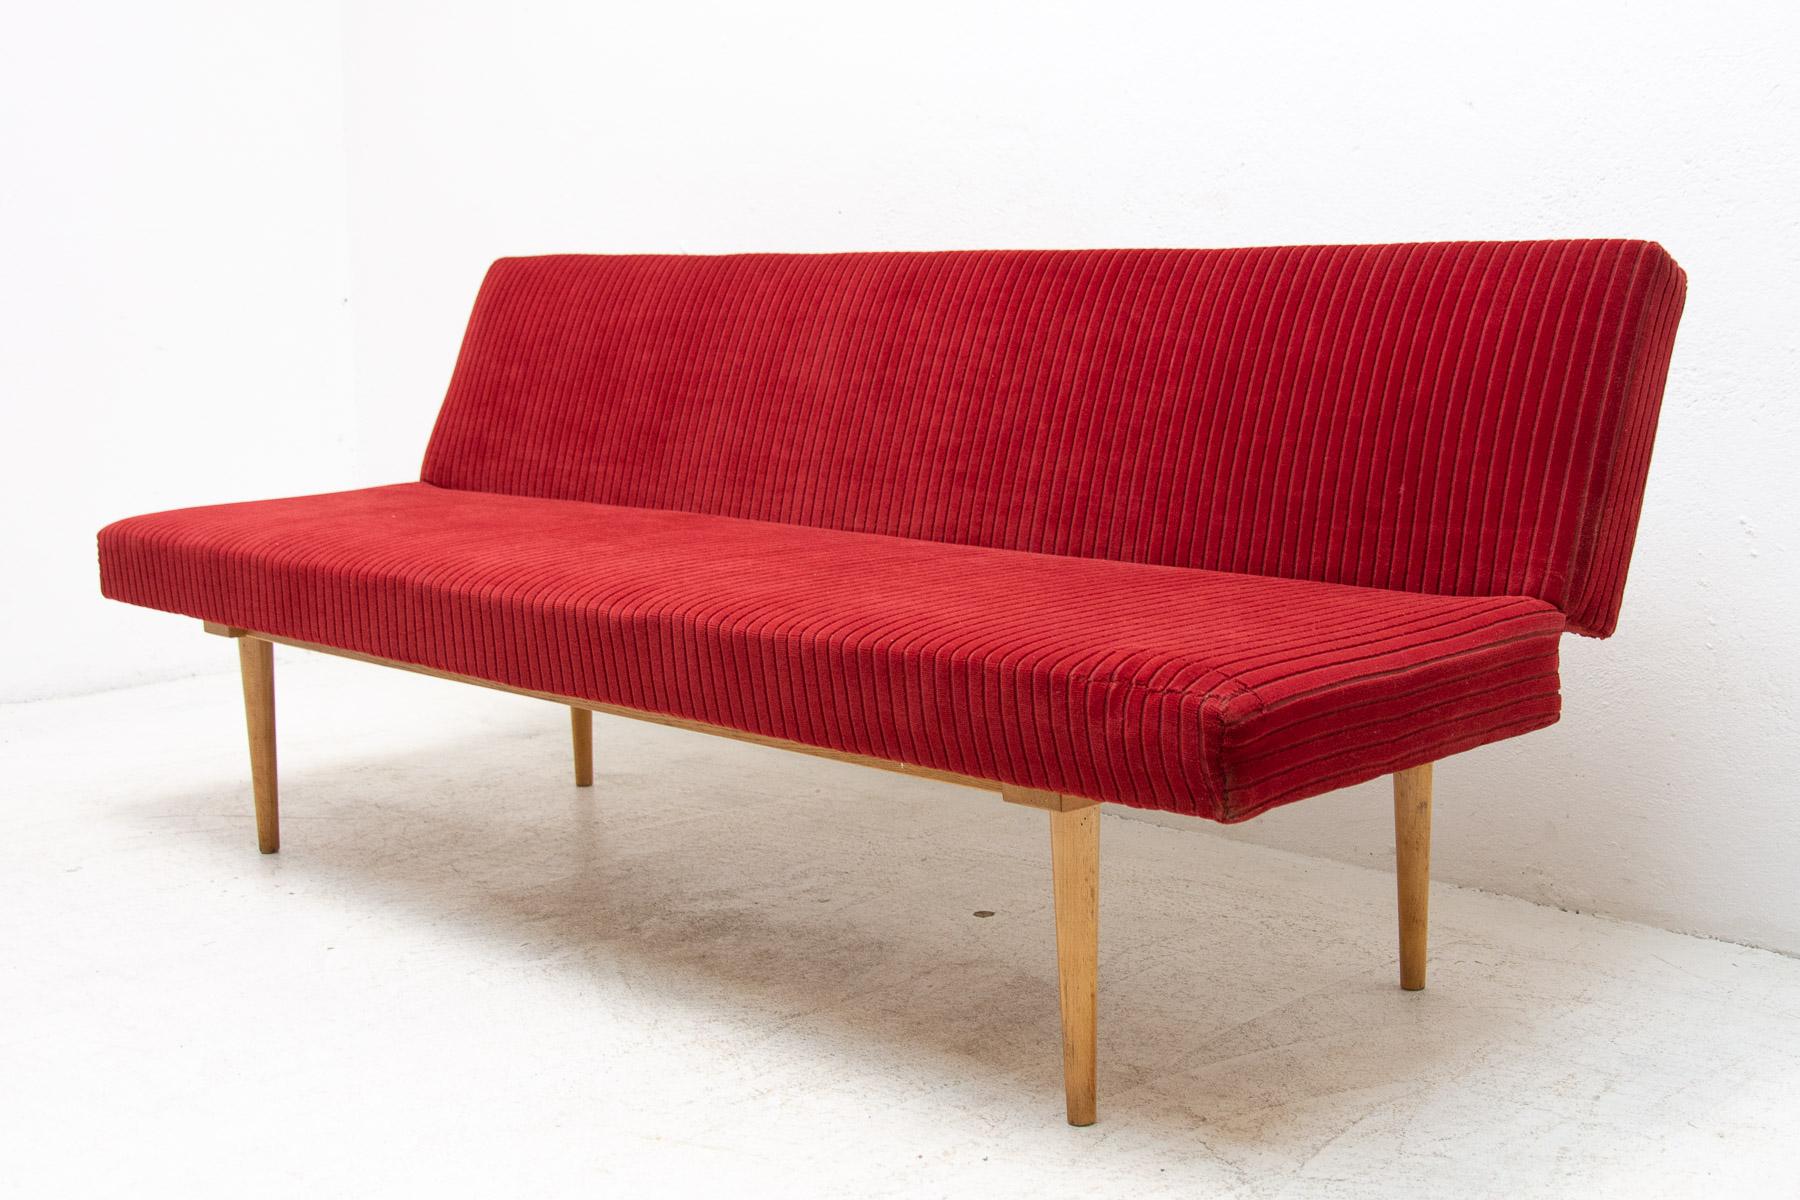 Mid century sofa/daybed, made in the former Czechoslovakia in the 1960´s, designed by Miroslav Navrátil. Material: beech wood, fabric. at one place the fabric has been sewn up in the past – it is not significantly visible and it does not disturb the